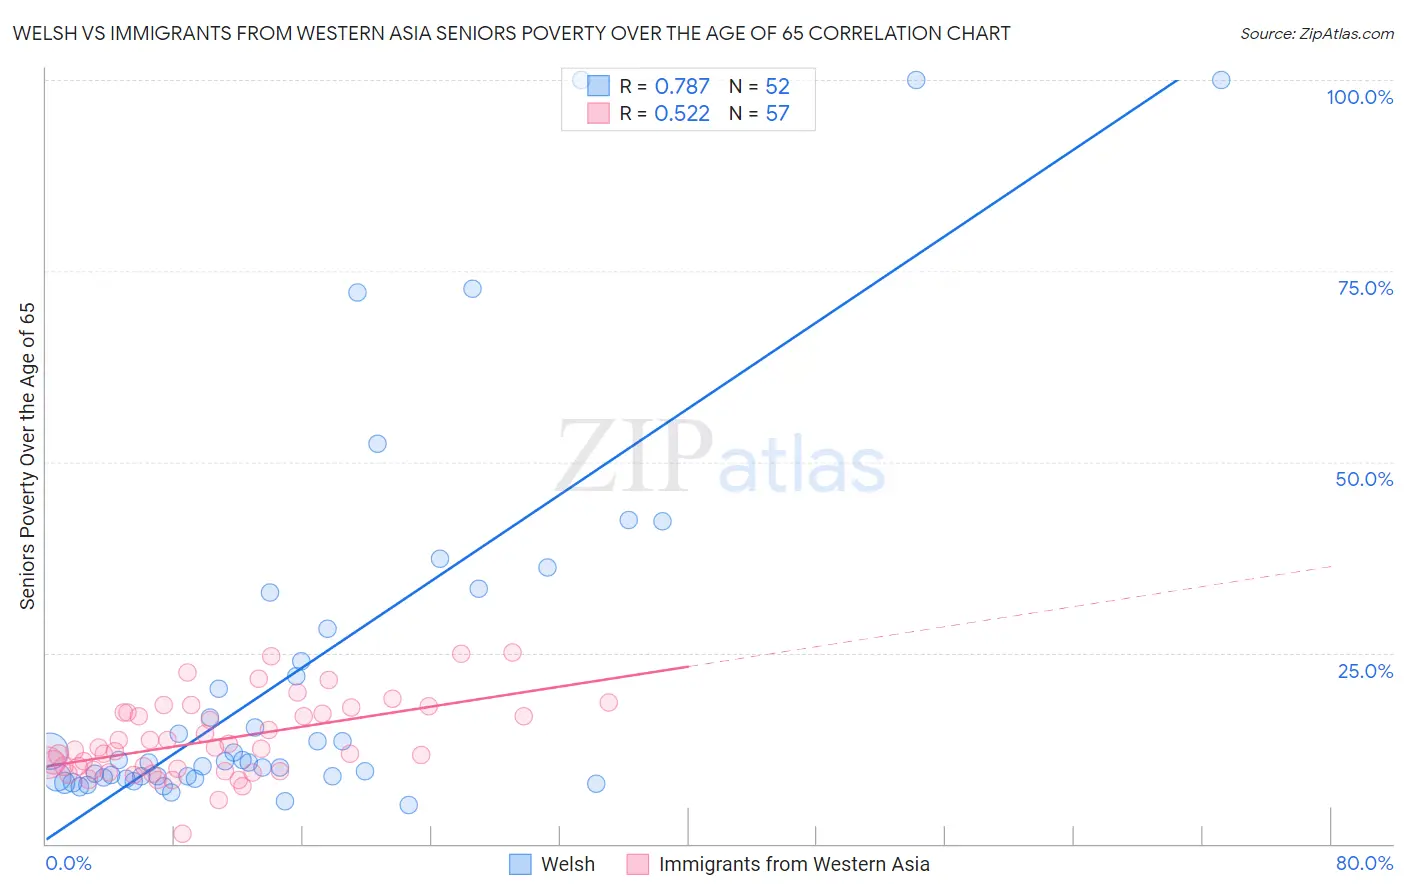 Welsh vs Immigrants from Western Asia Seniors Poverty Over the Age of 65